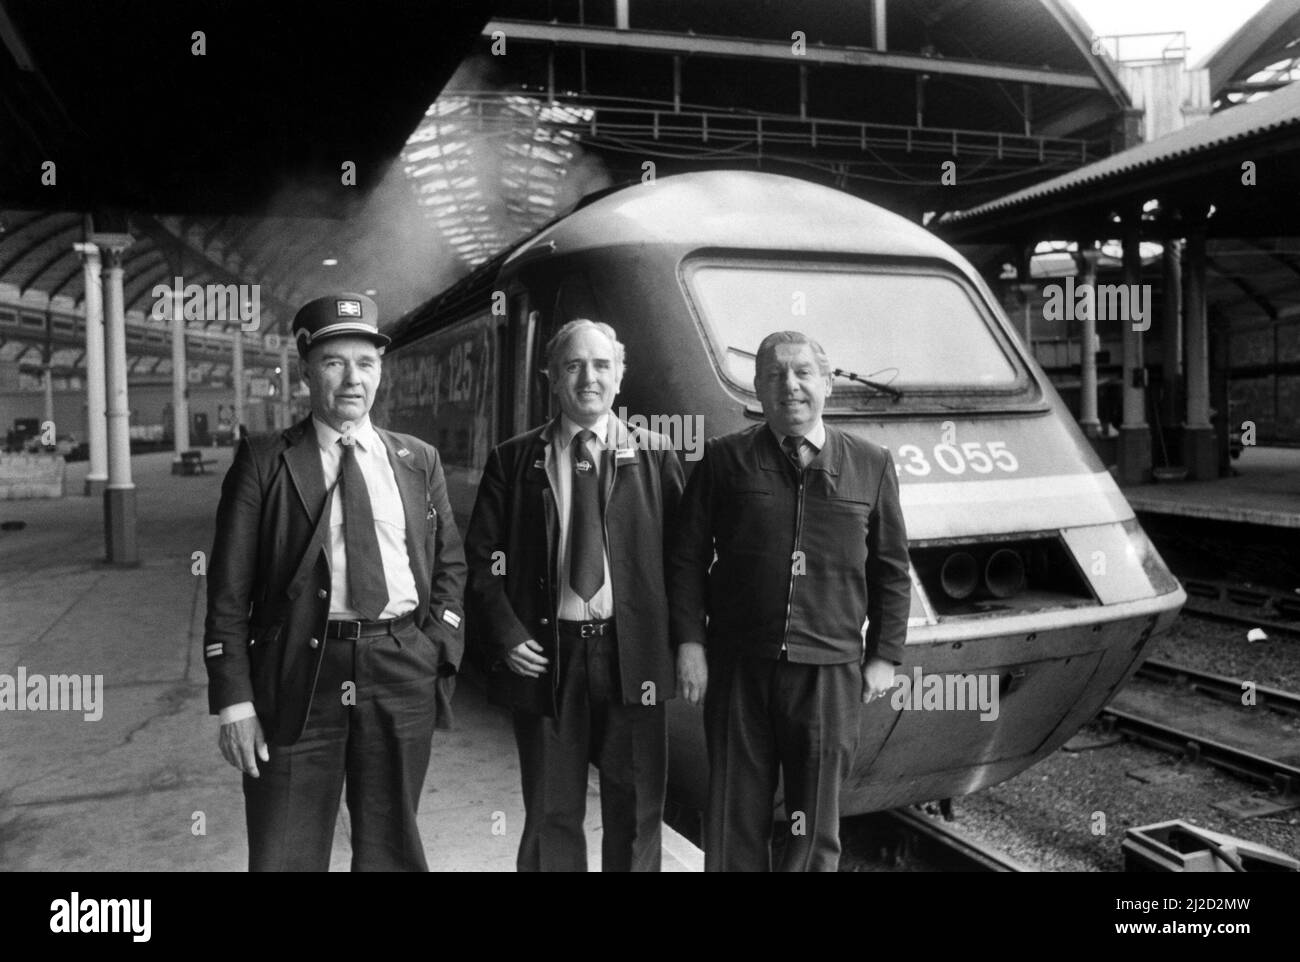 A real high speed team - drivers David Sursham (centre) and colin forster with guard Bill Smith at Newcastle Central Station on 21st May 1986 Stock Photo